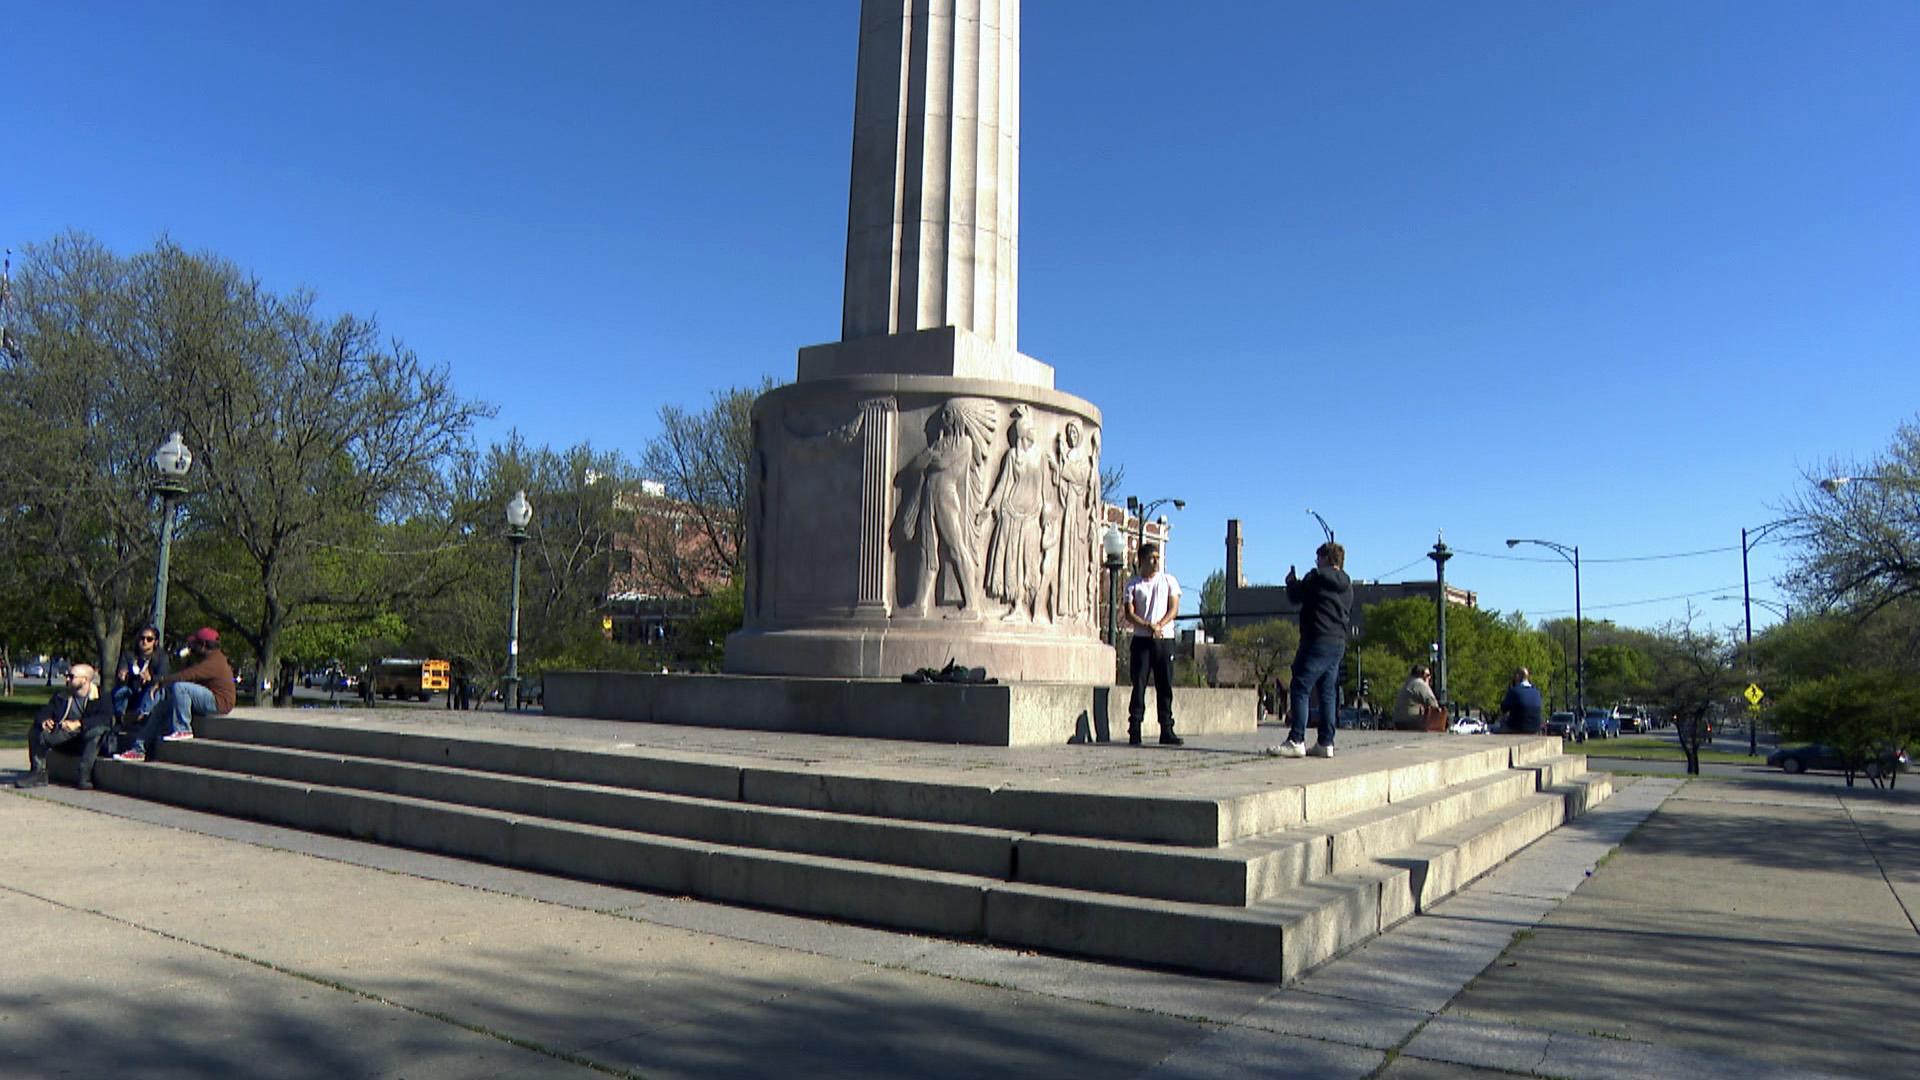 Visitors to Logan Square Park congregate near the Illinois Centennial Monument on April 30, 2021. The Logan Square Farmers Market has taken place adjacent to this park from May to October every year since 2005. (WTTW News)